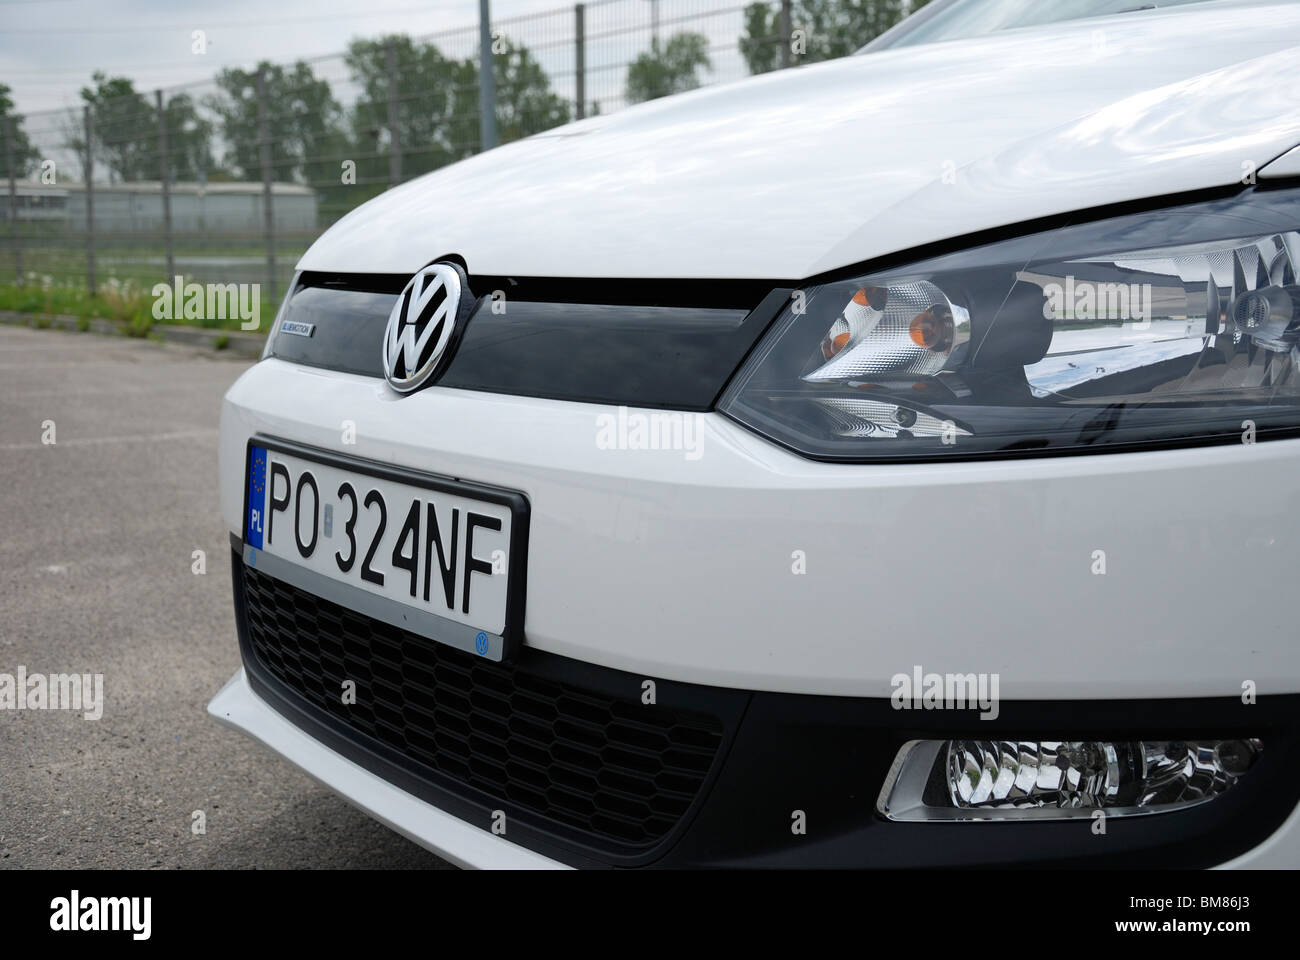 Polo 1.2 TDI BlueMotion - MY 2010 - white - five doors (5D) - German  subcompact city car - on parking space Stock Photo - Alamy